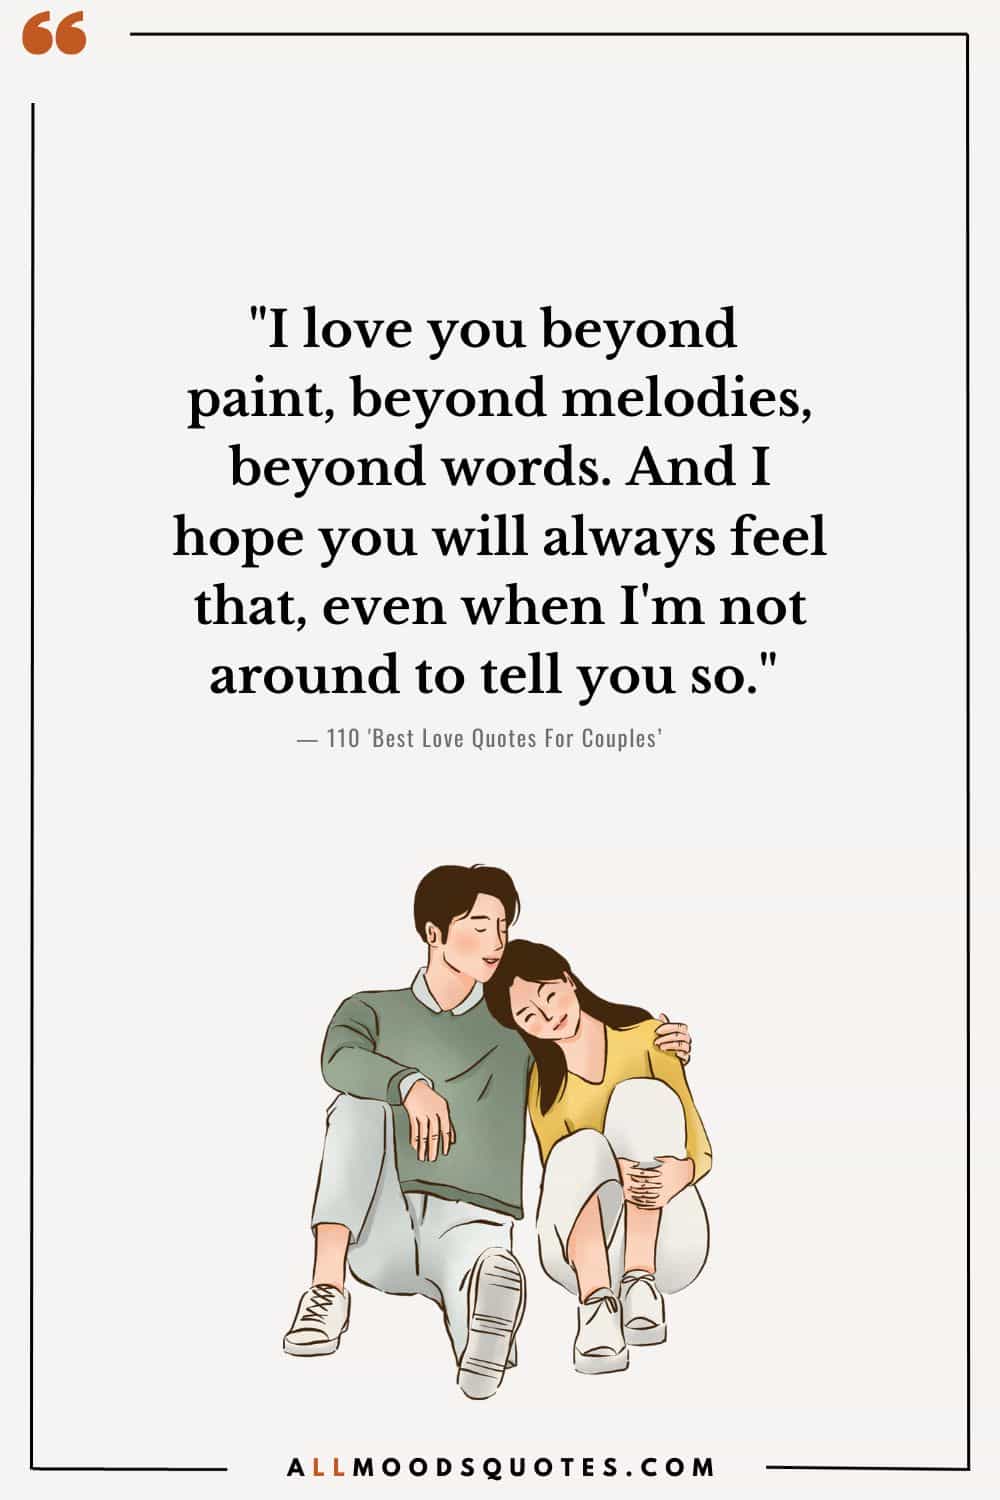 "I love you beyond paint, beyond melodies, beyond words. And I hope you will always feel that, even when I'm not around to tell you so." - Unknown